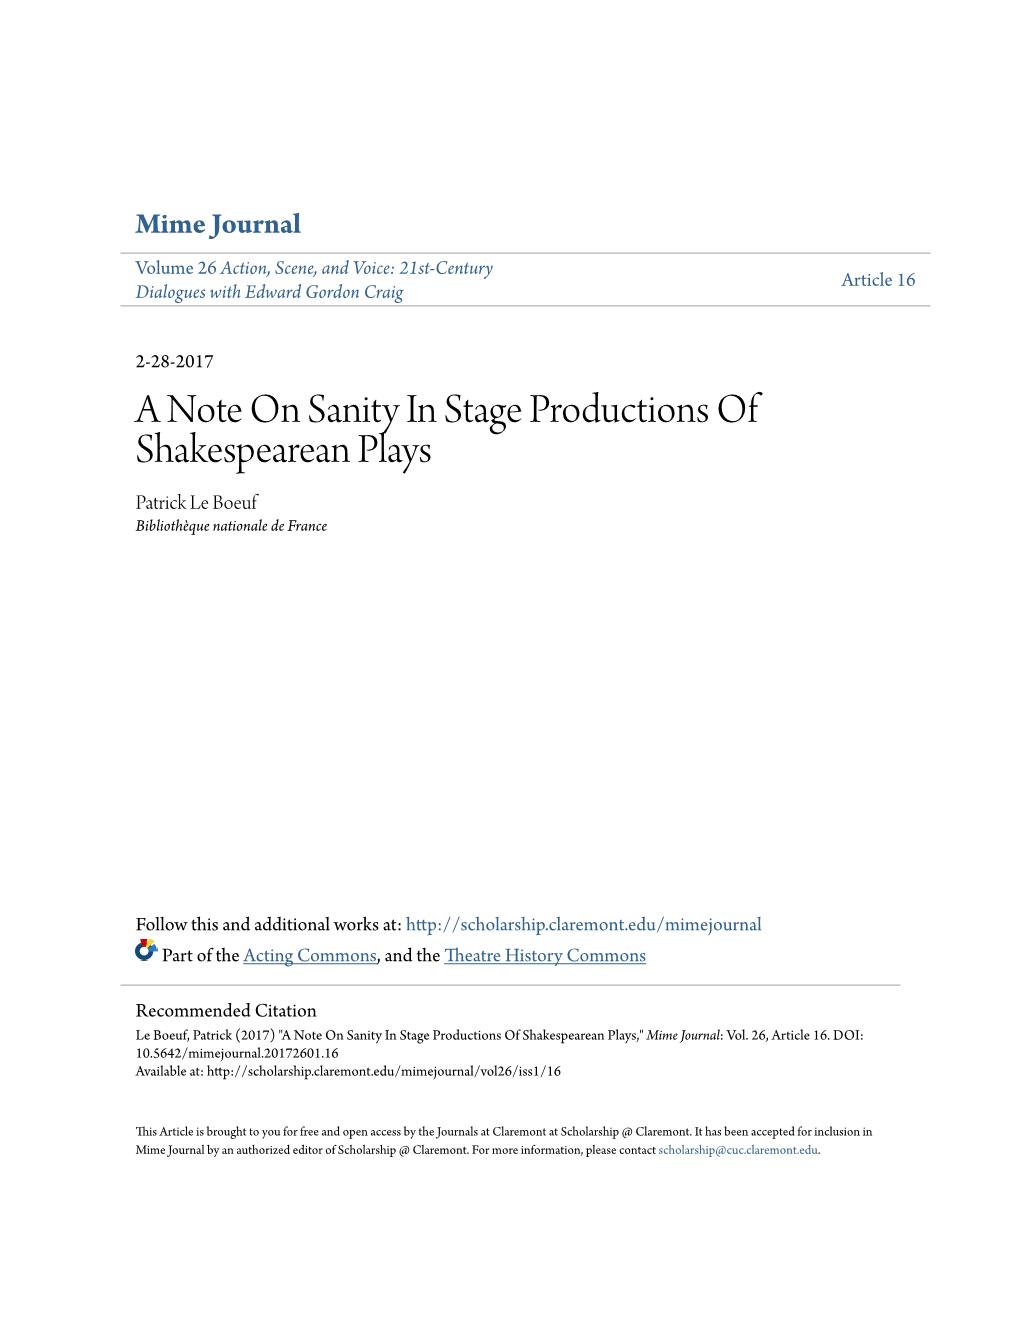 A Note on Sanity in Stage Productions of Shakespearean Plays Patrick Le Boeuf Bibliothèque Nationale De France